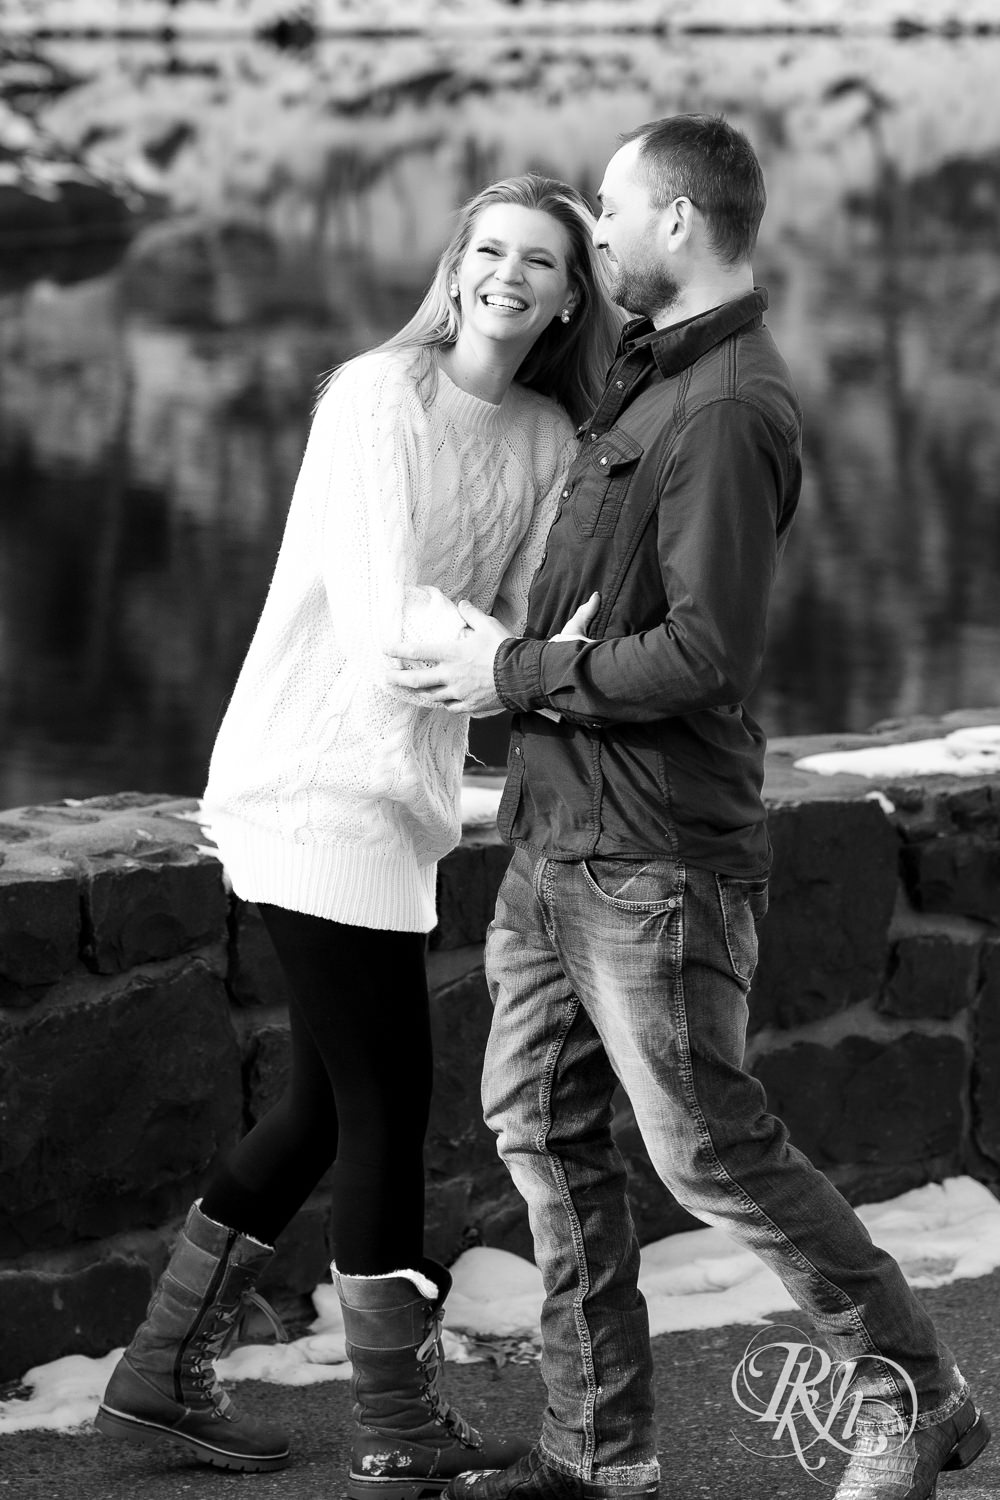 Man in jeans and green shirt and woman in a white sweater laugh during Taylor's Falls engagement photography session.